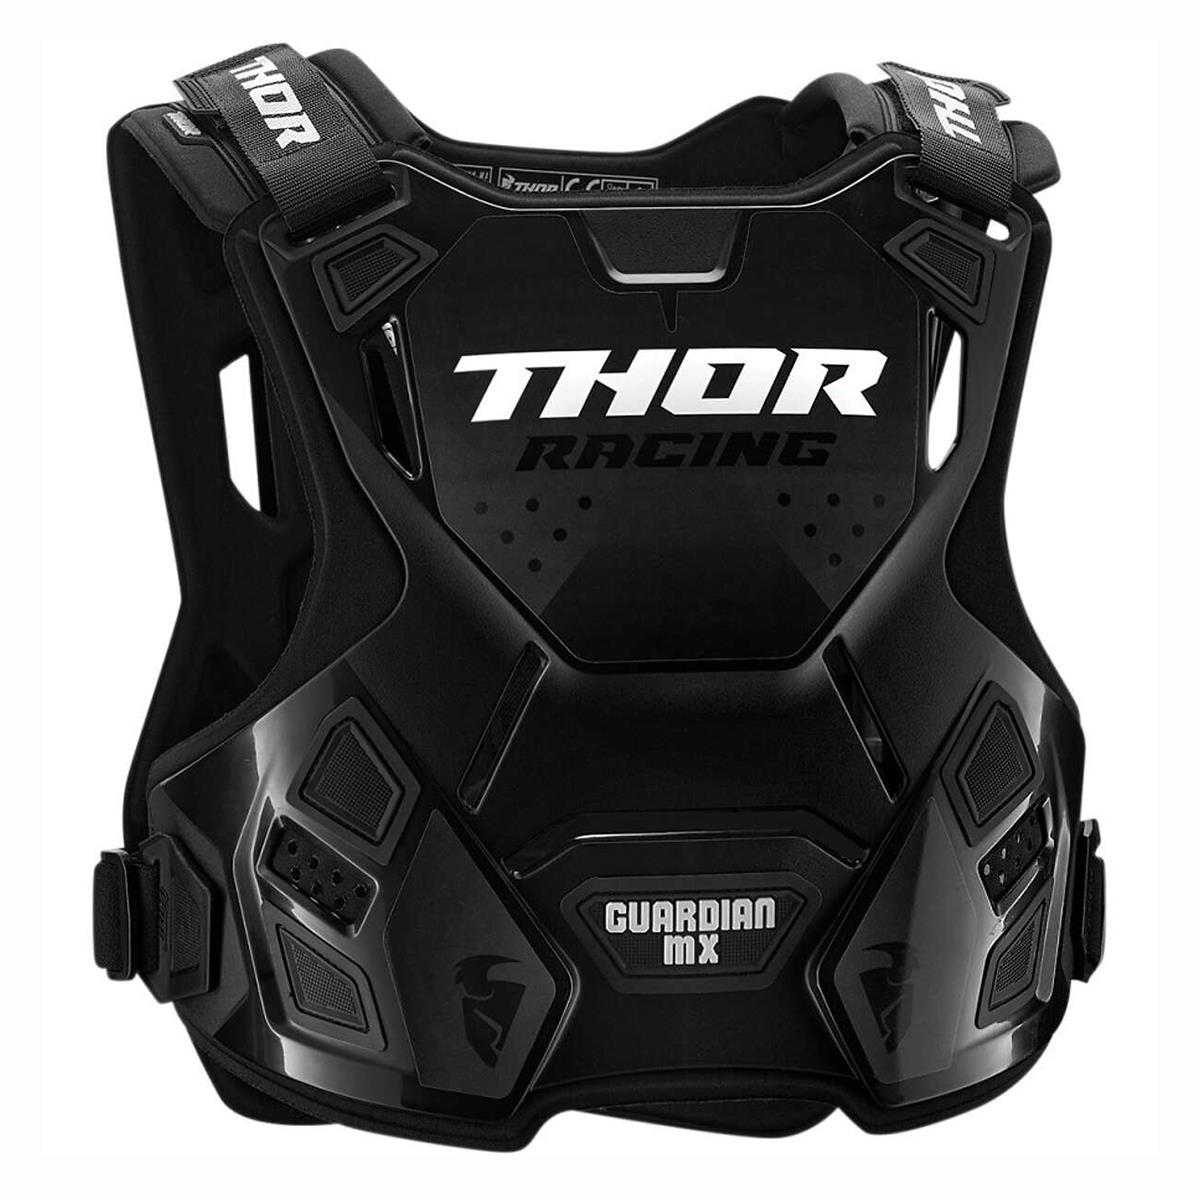 Thor S17 GUARDIAN Motocross Adults Body Armour Mx Motorcycle Quad Dirt Bike BMX Enduro Off Road ATV Racing Chest Spine Guard Protector 